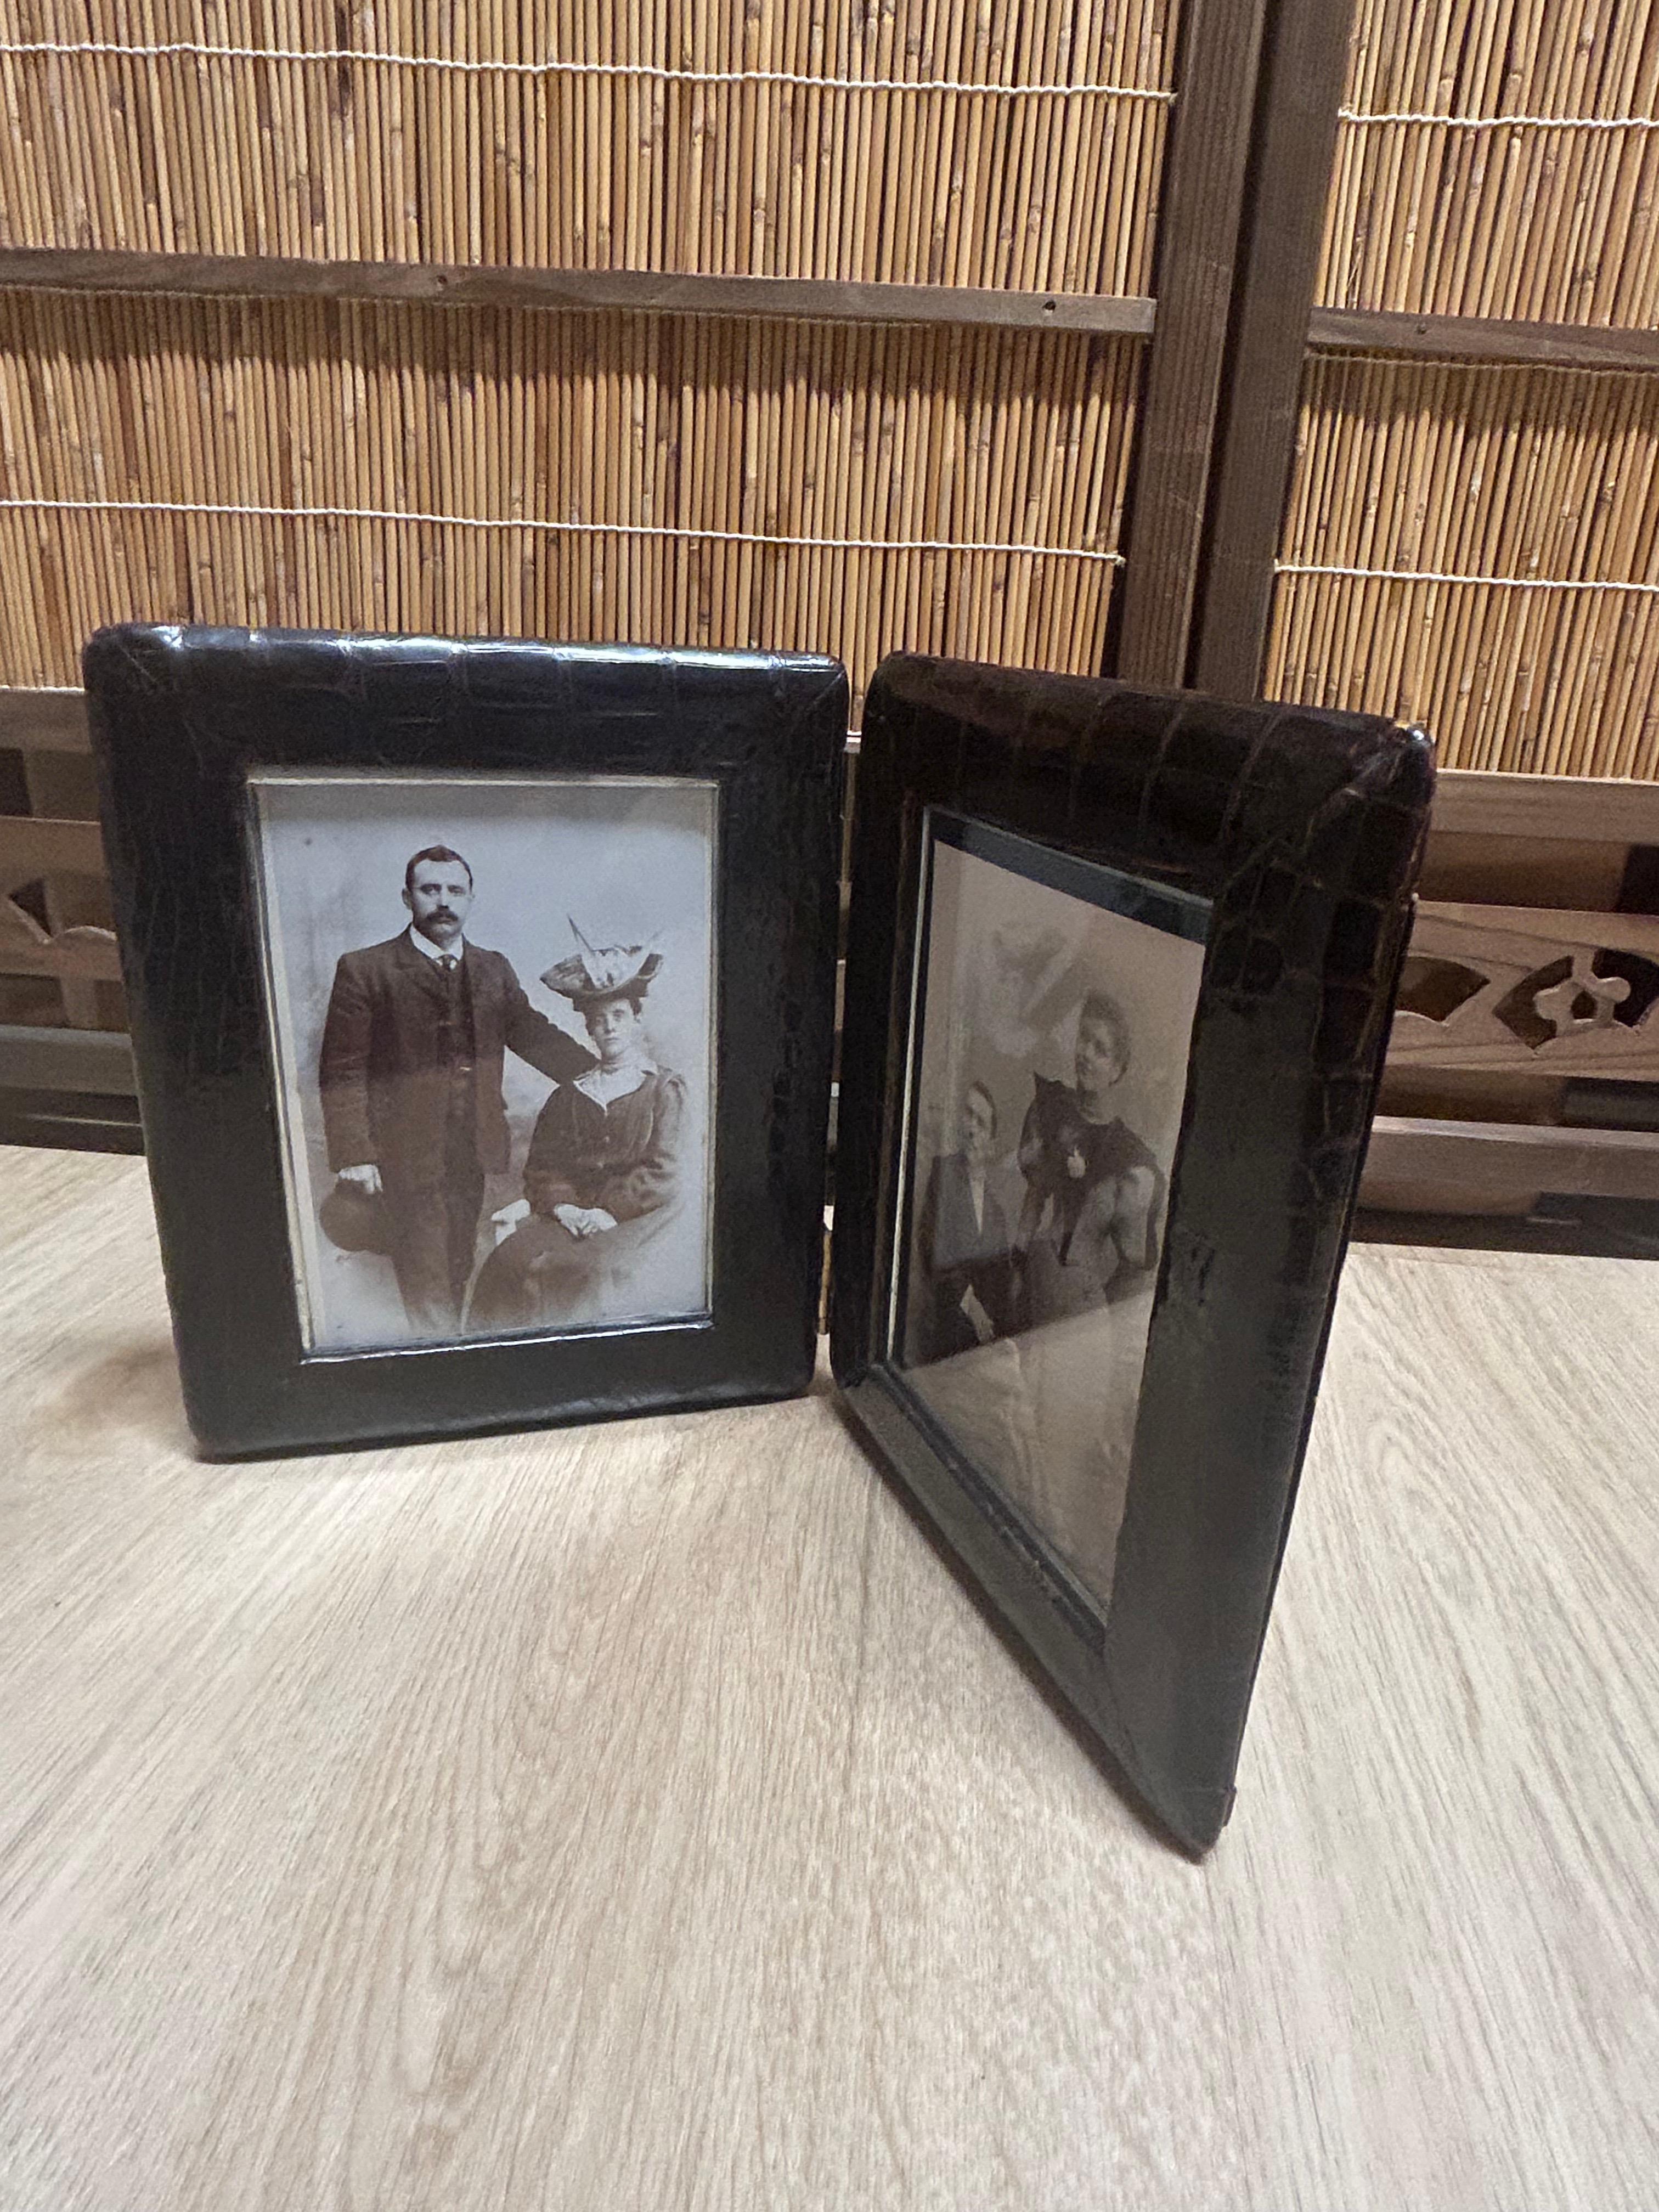 An Edwardian Alligator skin Double Photograph Frame, each frame containing an Edwardian husband and wife portrait, with dark green leather backing each frame. This Edwardian photograph frame is a deluxe model of its type, with Alligator skin on the